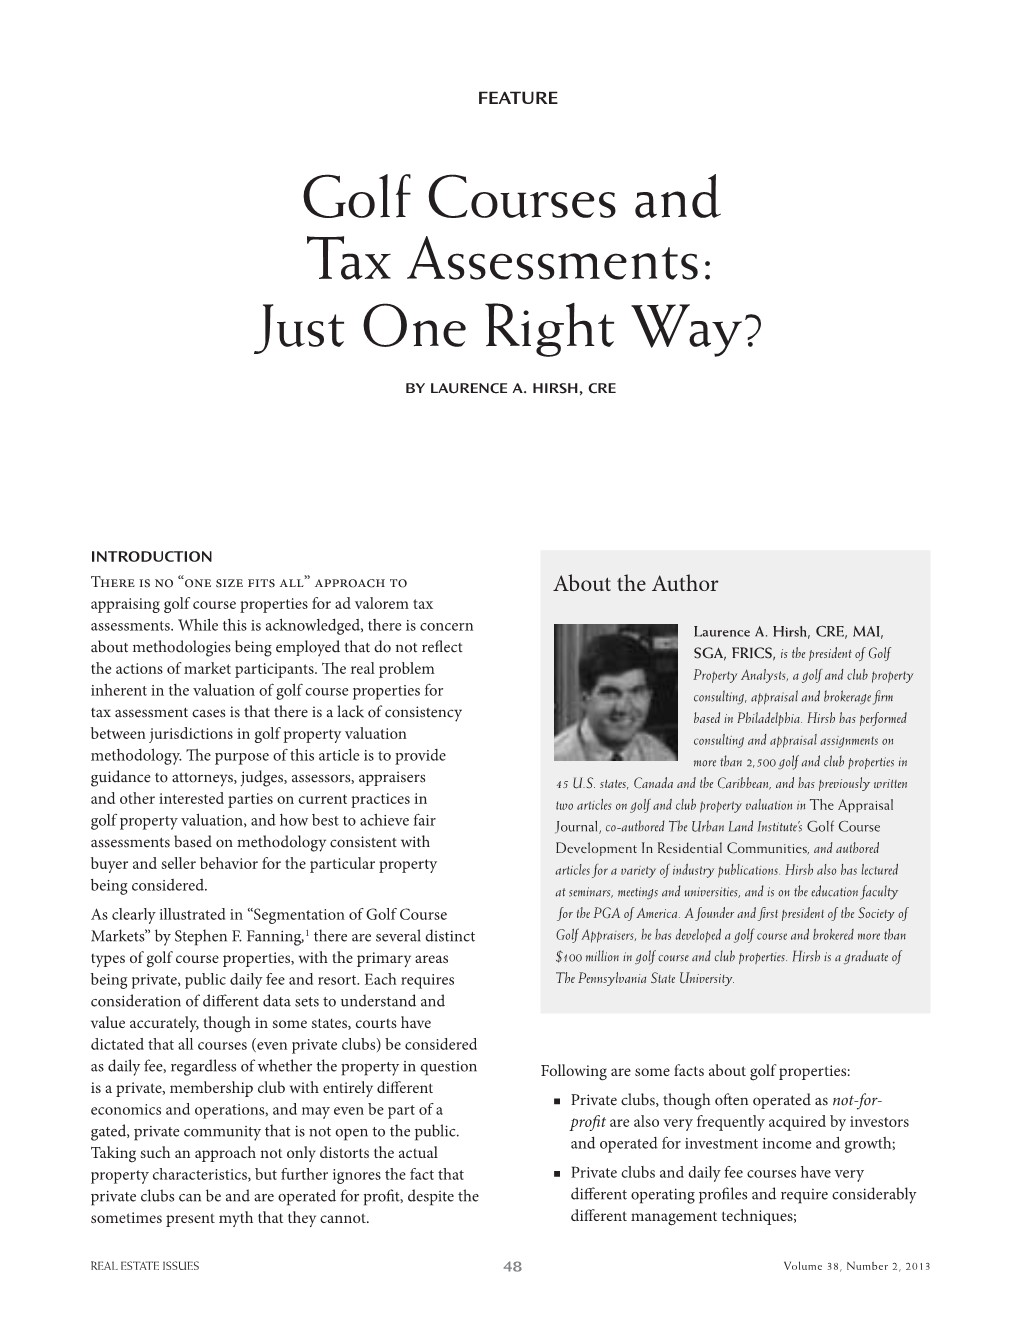 Golf Courses and Tax Assessments: Just One Right Way?